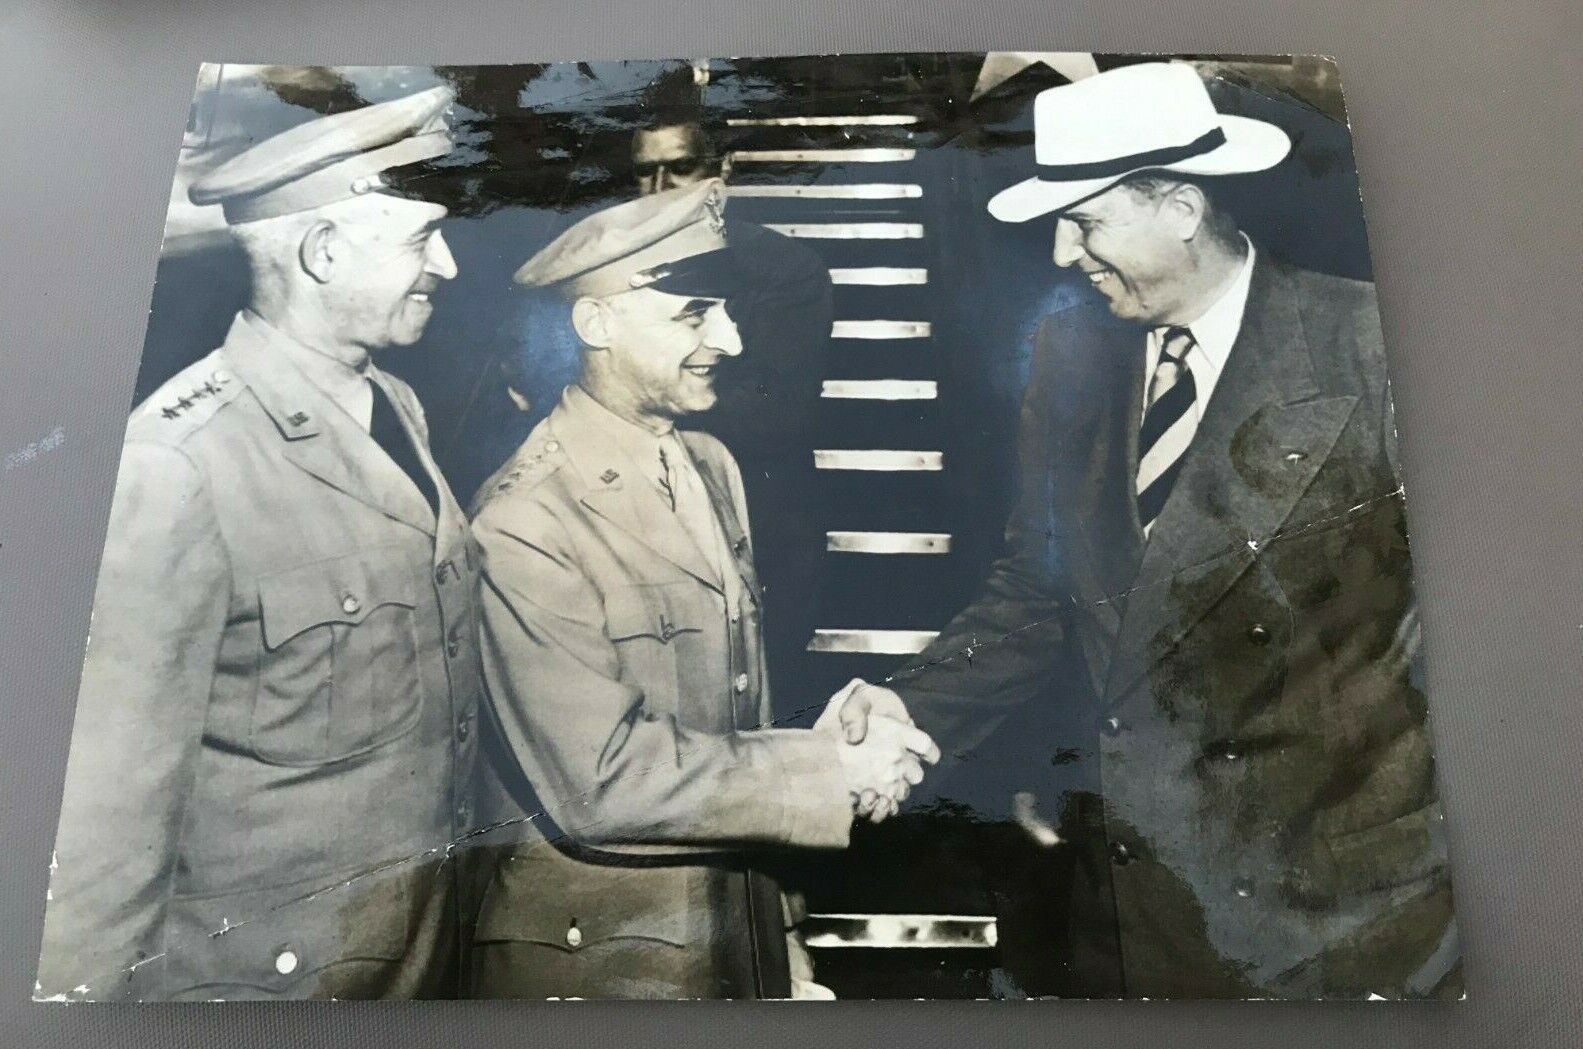 WW2 WWII U.S PHOTO ARMY OFFICER GENERAL LUCIUS D. CLAY IN WASHINGTON D.C 1940s